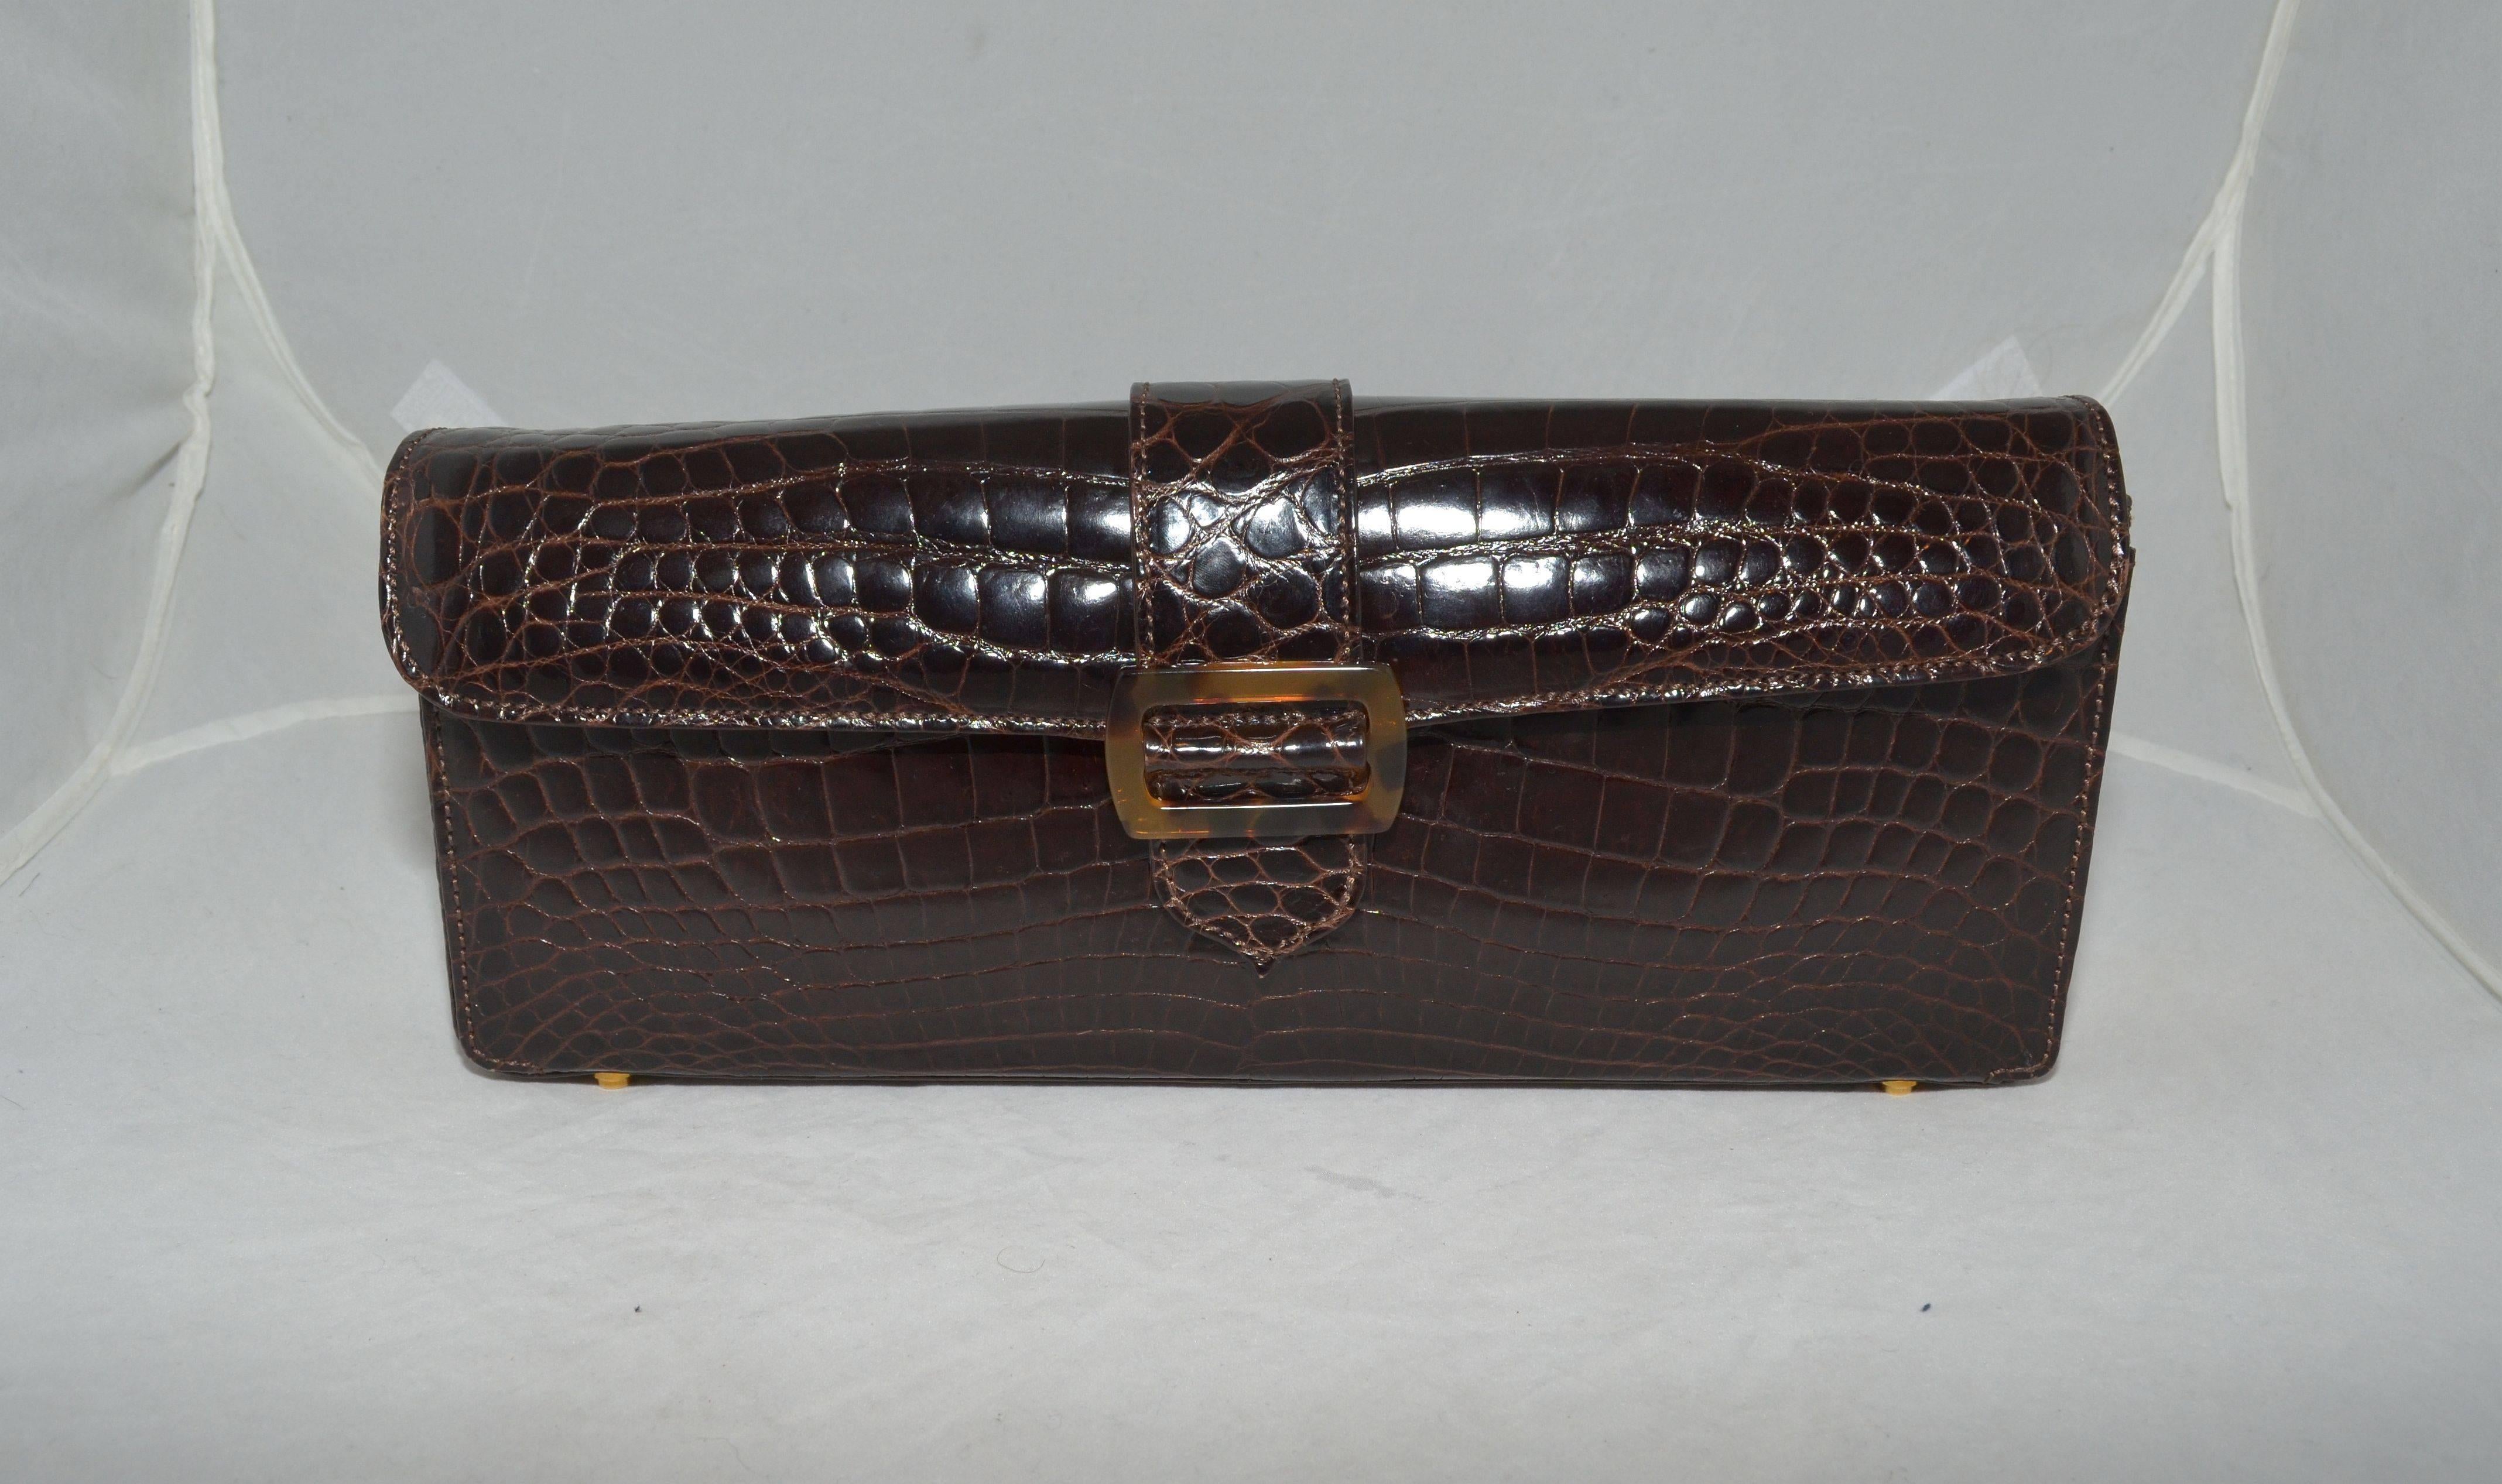 Lana Marks Alligator Clutch with 2 optional Shoulder Straps Tortoise Link and matching alligator Strap Bag

Exquisite Lana Marks clutch is featured in a dark brown alligator skin with a magnetic snap flap closure with a tortoise buckle at the